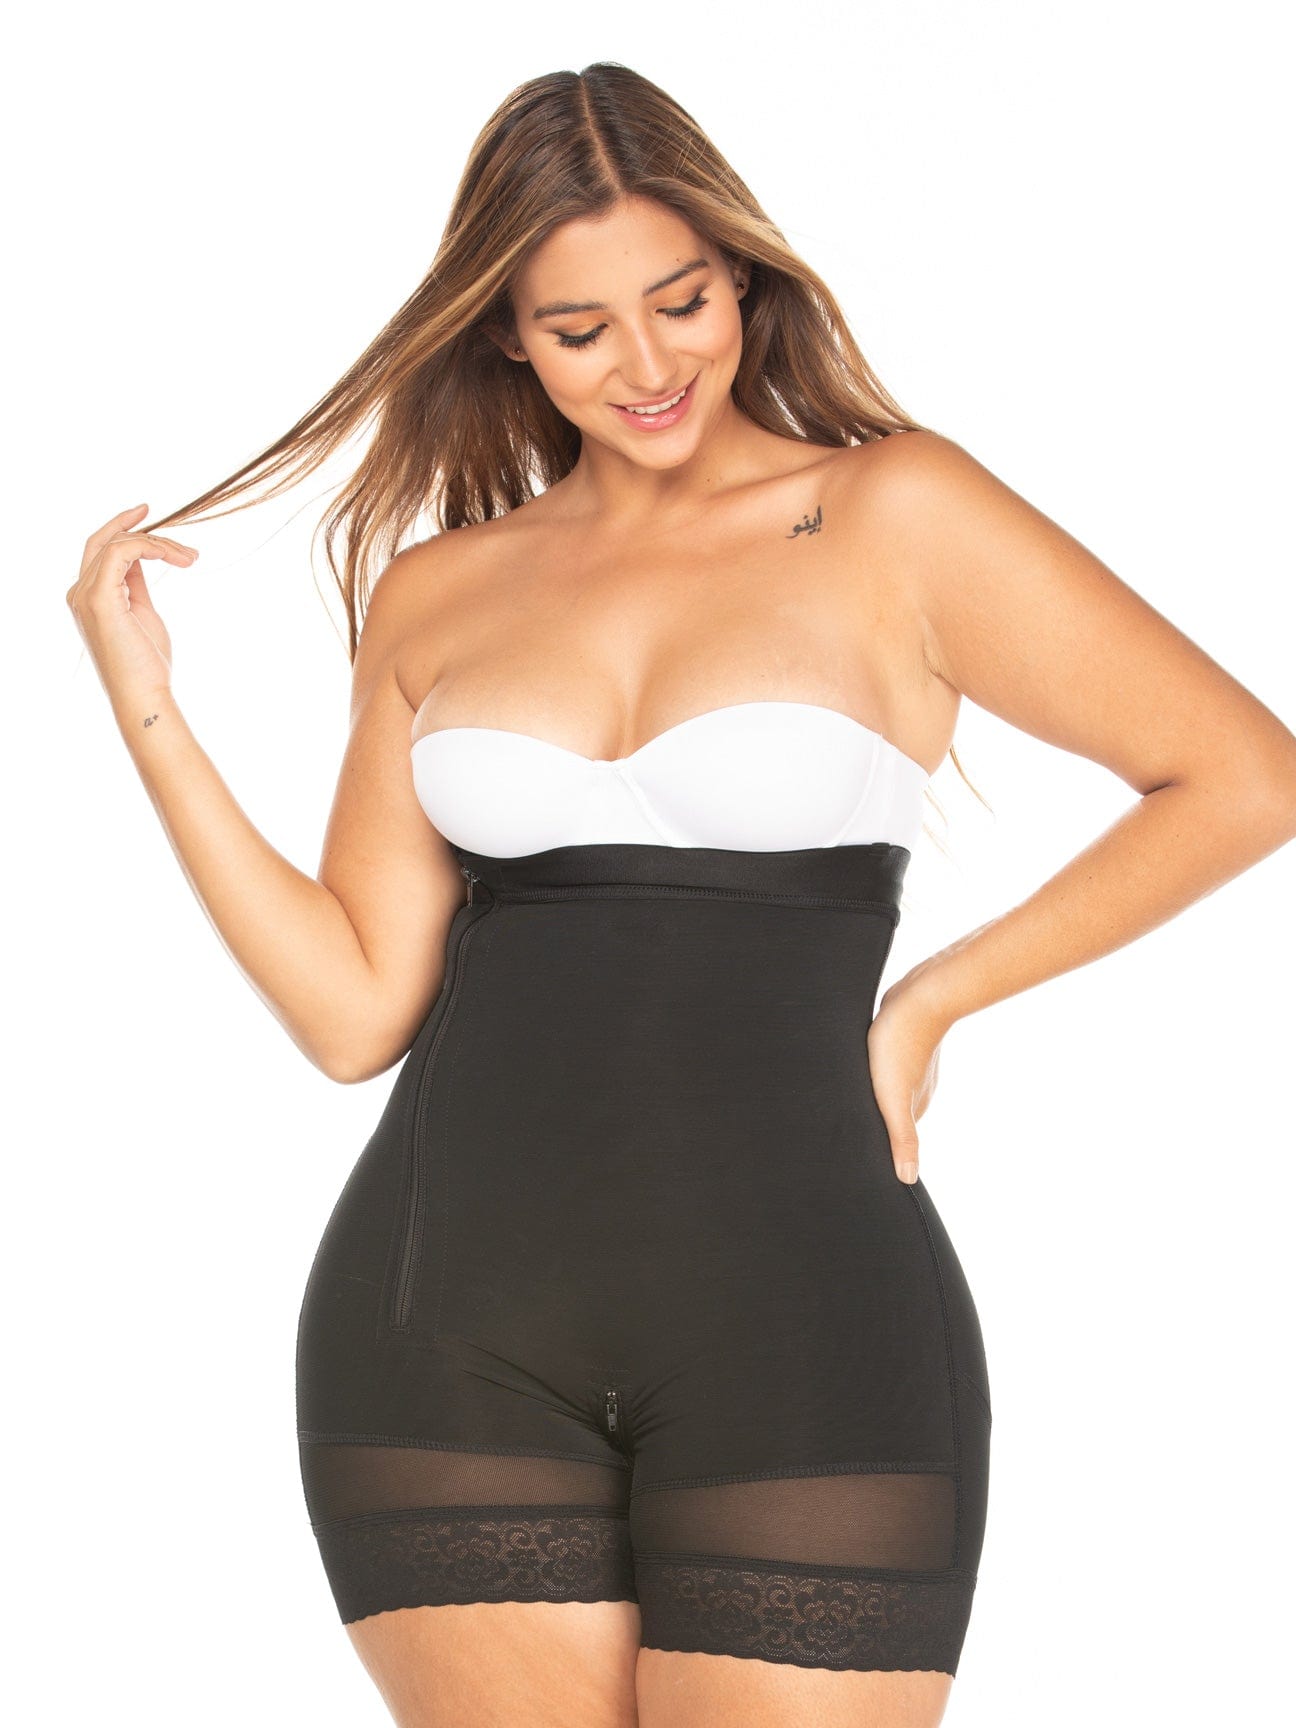 Colombian Fajas Colombiana Girdle Slim Body Shaper With Brooches For Daily  And Post Use Use Slimming Sheath Belly For Women 231120 From Bao04, $18.13